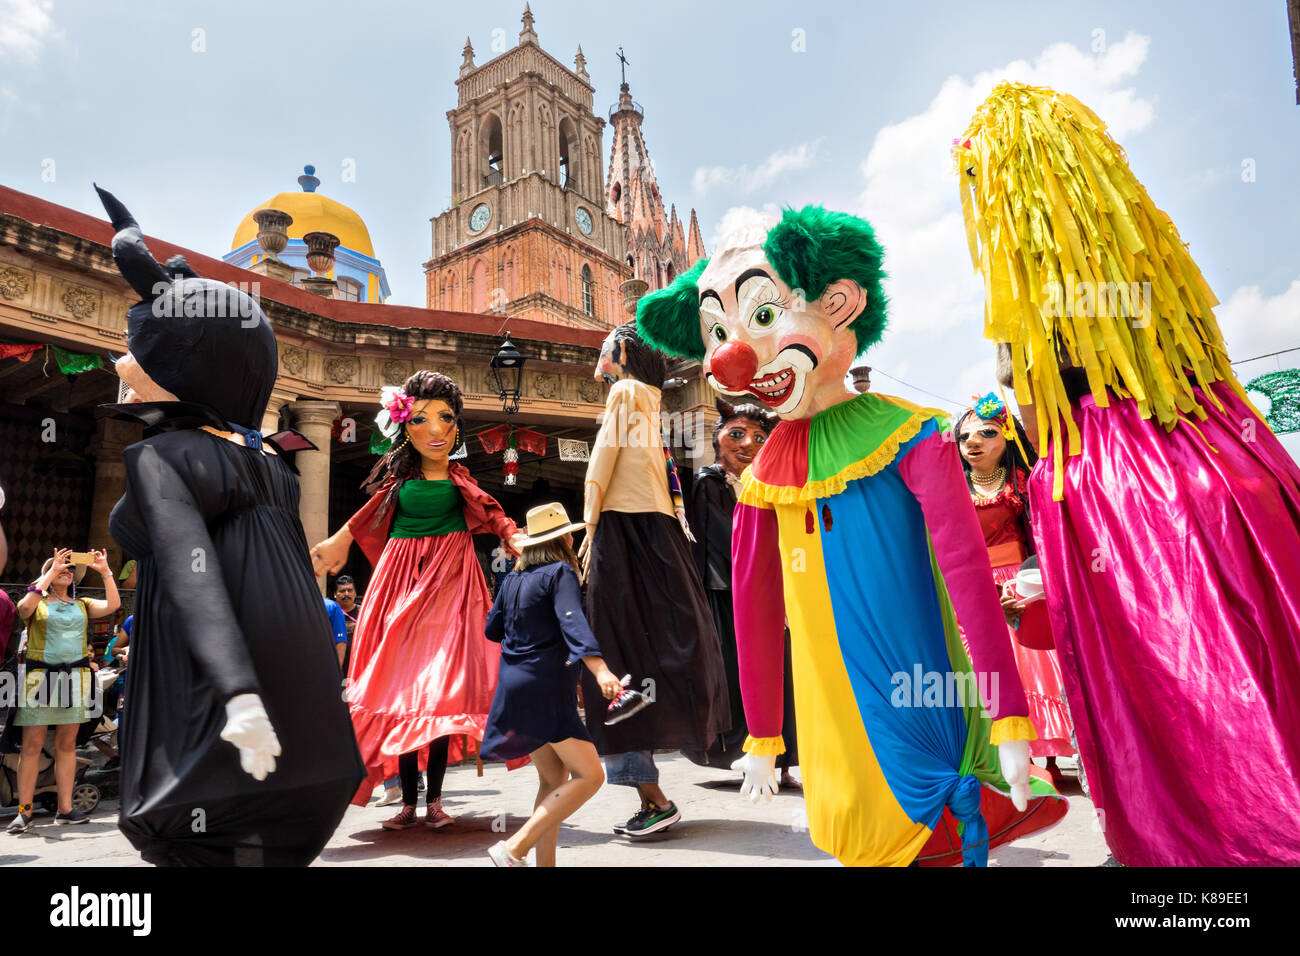 Giant papier mache puppets called mojigangas dance in front of the Parroquia de San Miguel Arcangel church during a children's parade celebrating Mexican Independence Day celebrations September 17, 2017 in San Miguel de Allende, Mexico. Stock Photo